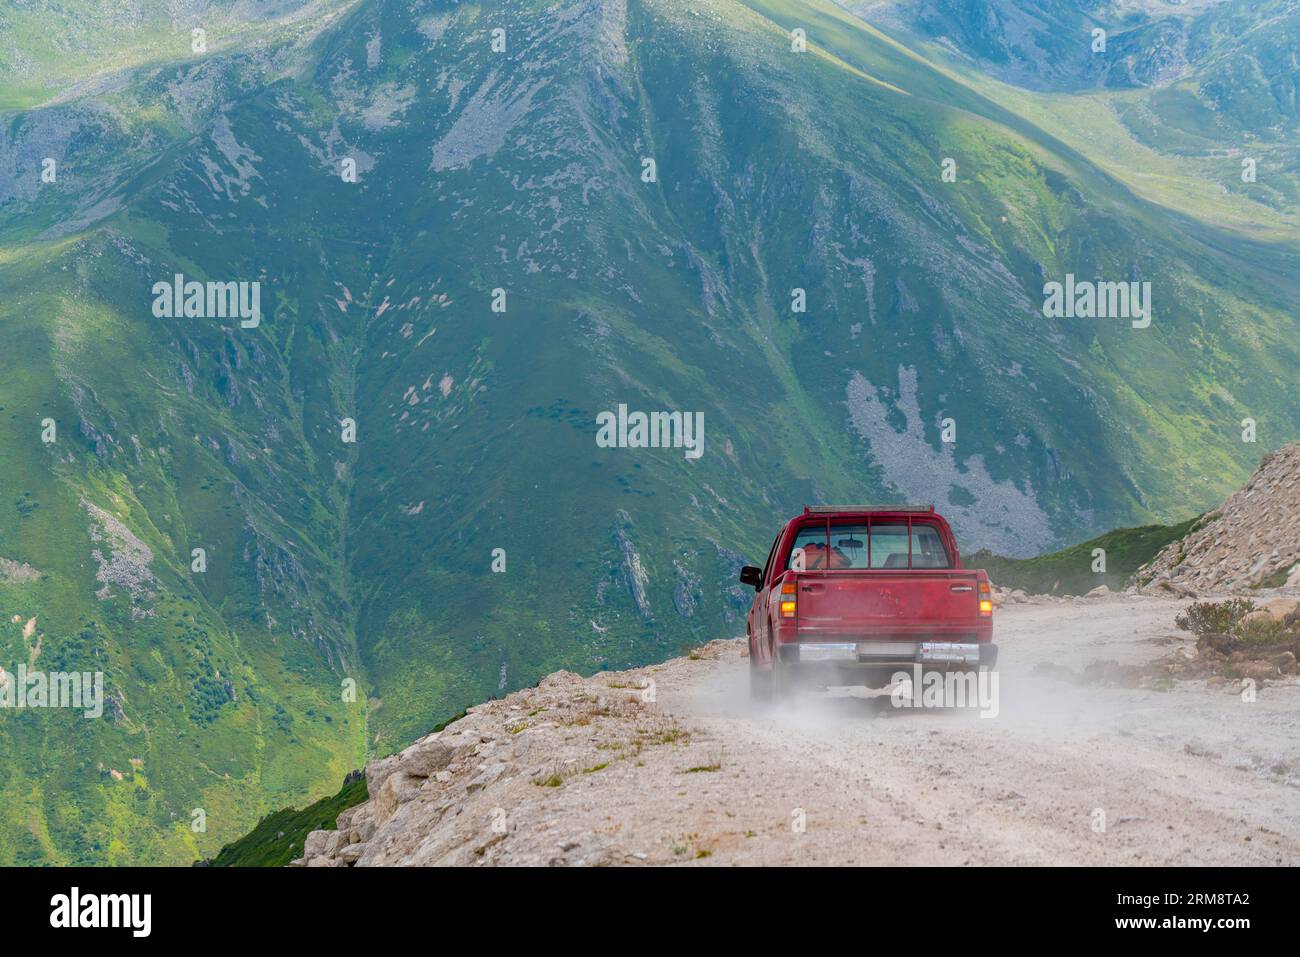 A red pickup truck driving on dirt roads on high plateau roads in Turkey Stock Photo